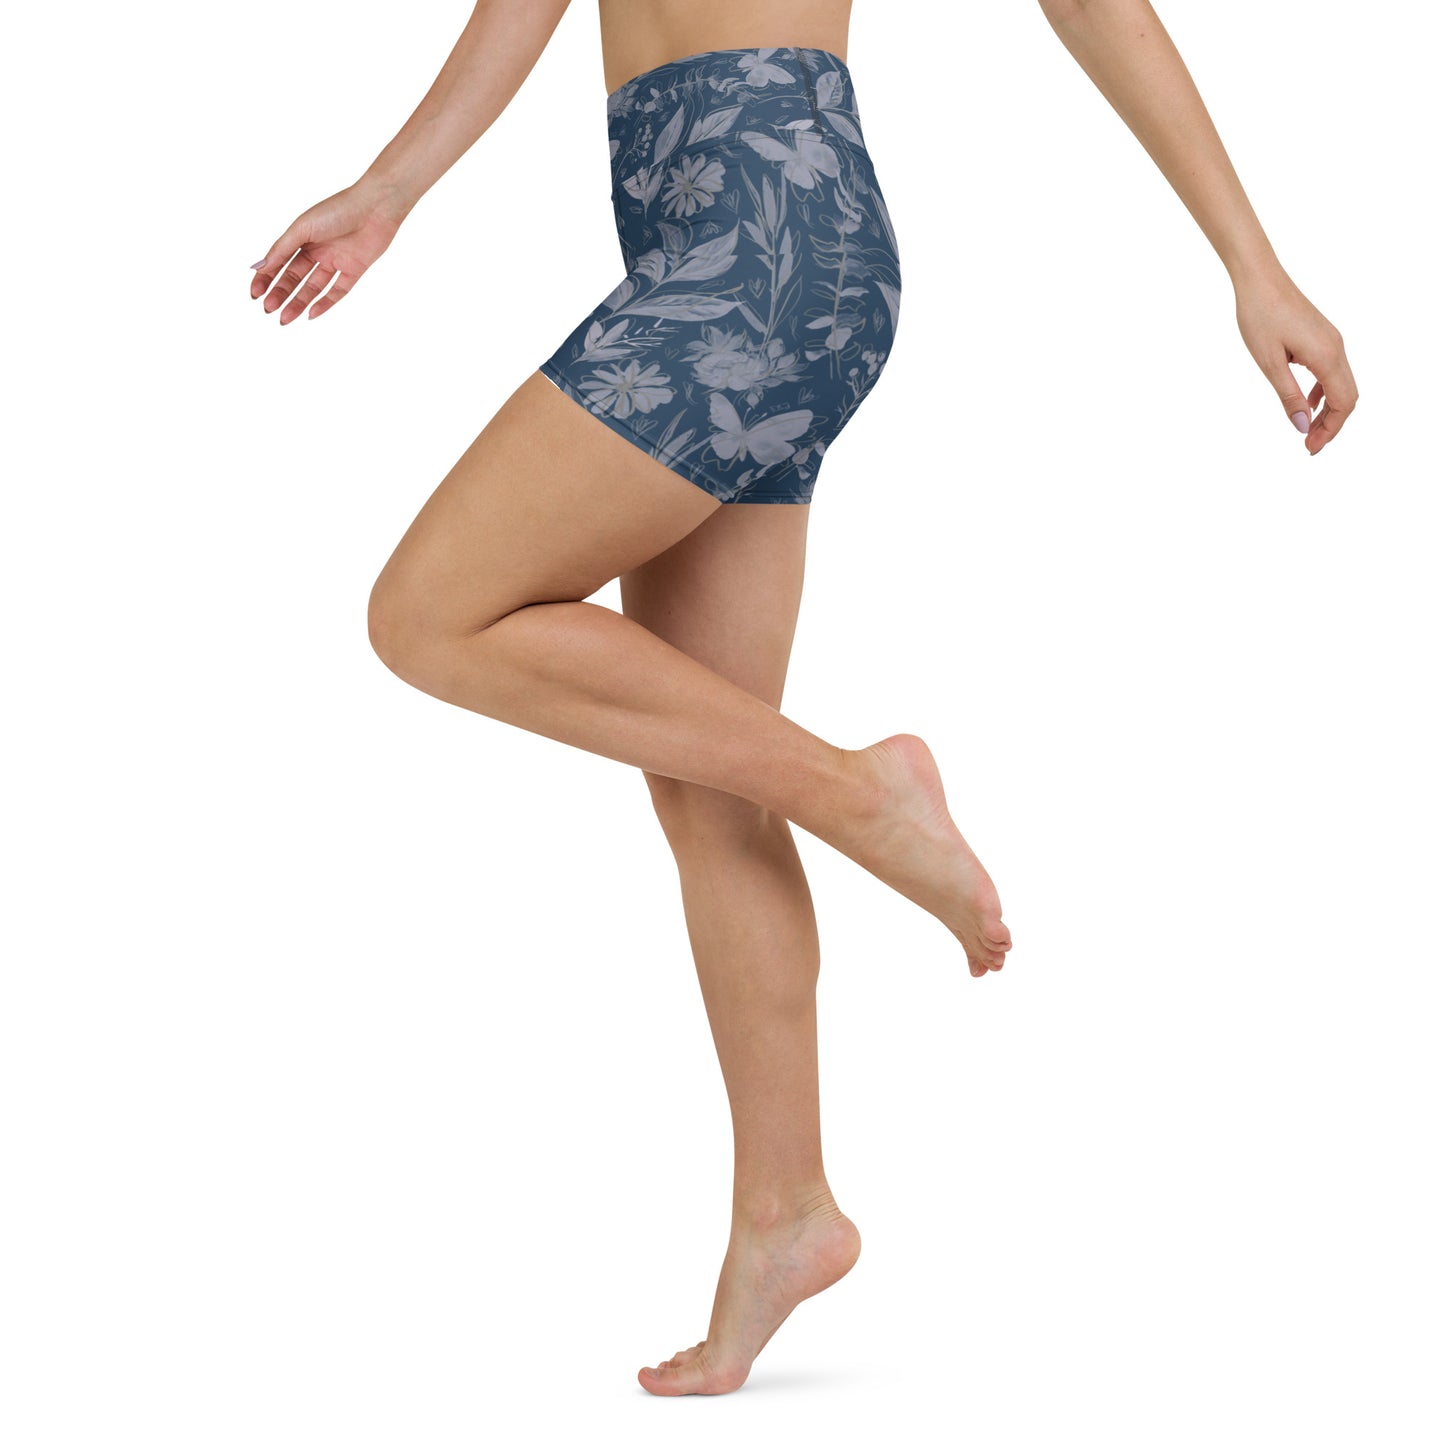 Watercolor Blue Yoga Shorts. Houston Collection. Design hand-painted by the Designer Maria Alejandra Echenique